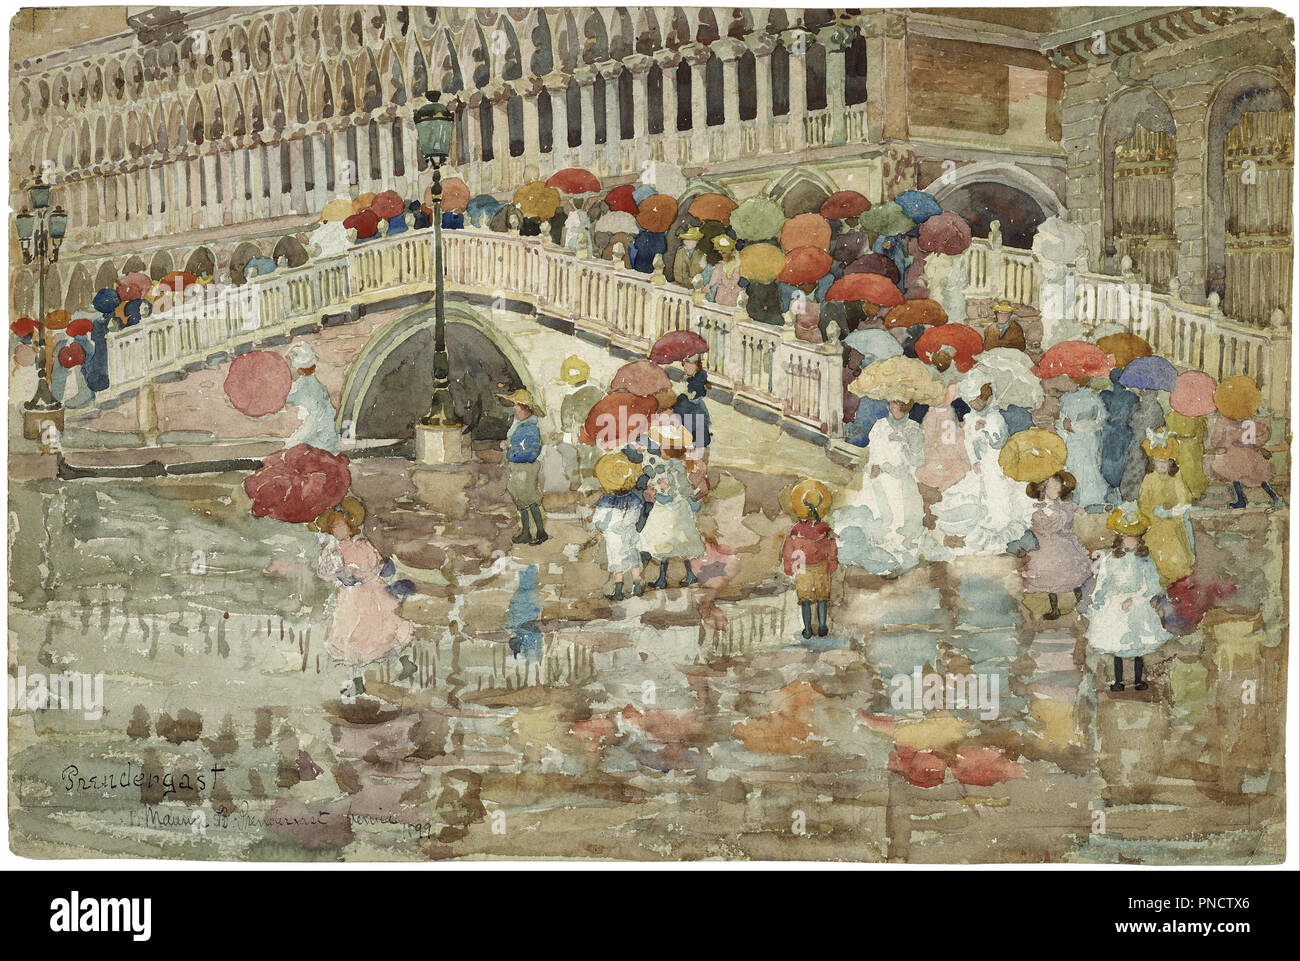 Umbrellas in the Rain. Date/Period: 1899. Painting. Watercolor. Height: 354 mm (13.93 in); Width: 530 mm (20.86 in). Author: Maurice Prendergast. Stock Photo